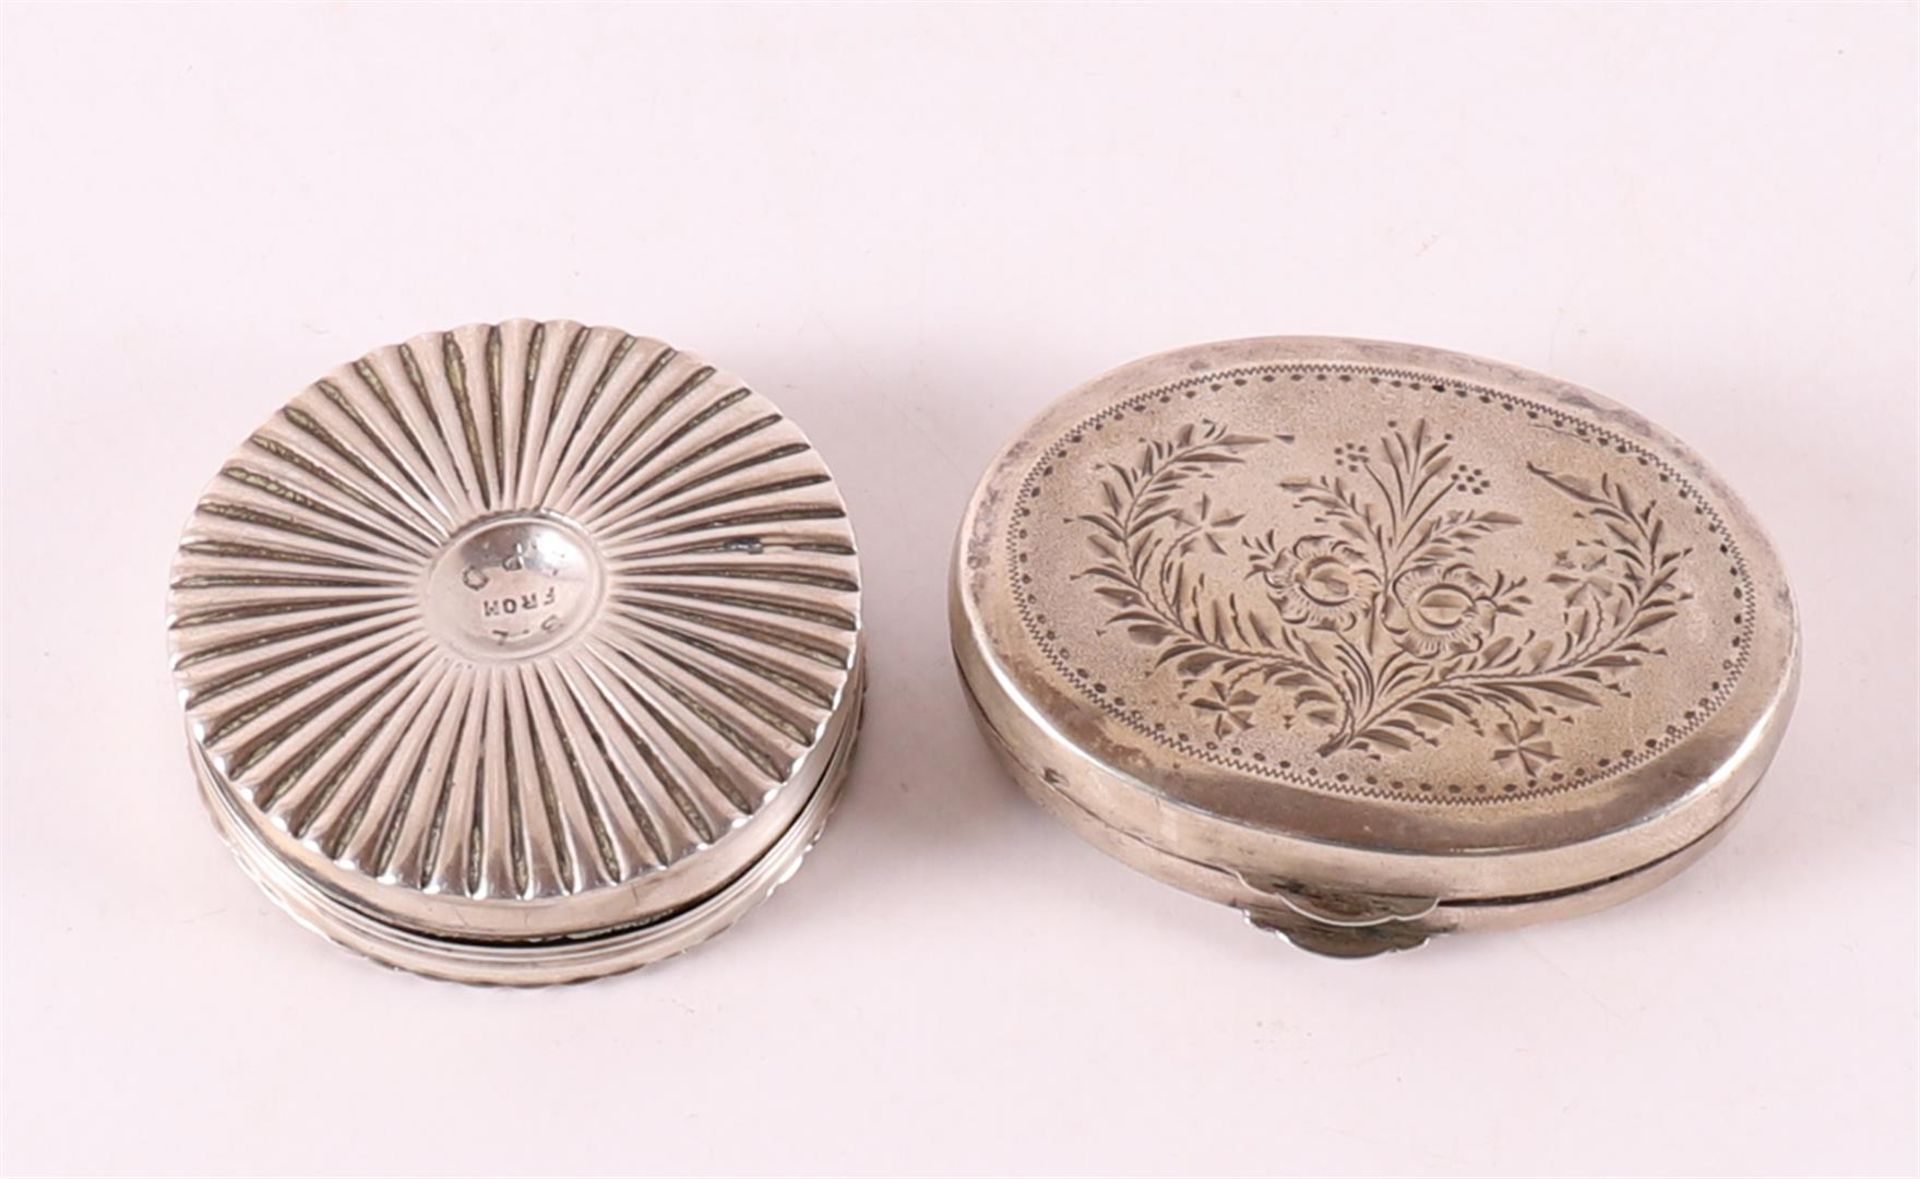 A 2nd grade 835/1000 oval silver pill box, year letter 1893.